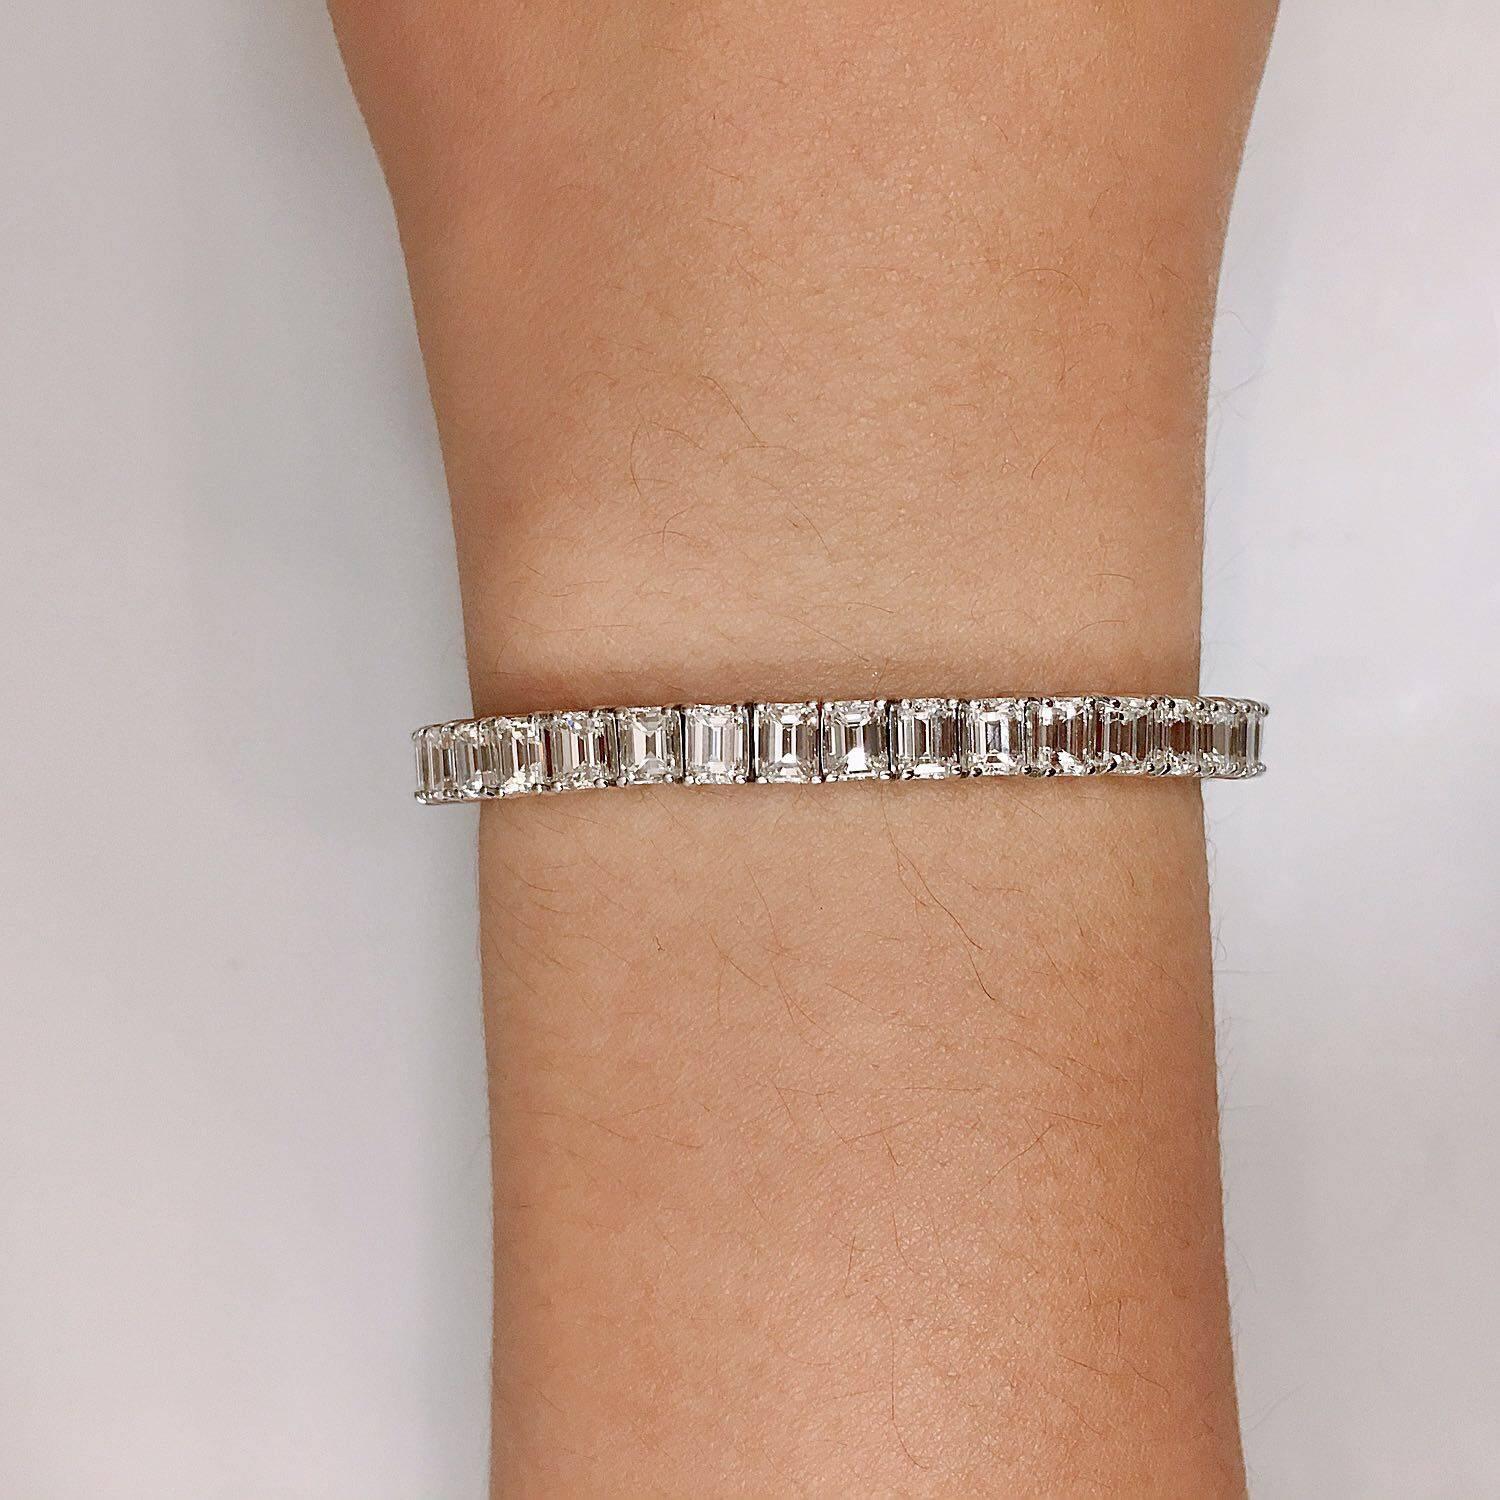 From Emilio Jewelry a well known dealer and jewelry manufacturer located on New York's iconic Fifth Avenue.
This bracelet has been custom and hand made in 18k white gold. Each and every diamond is Gia certified as natural:
.30ct Each + 
Color: D-E-F